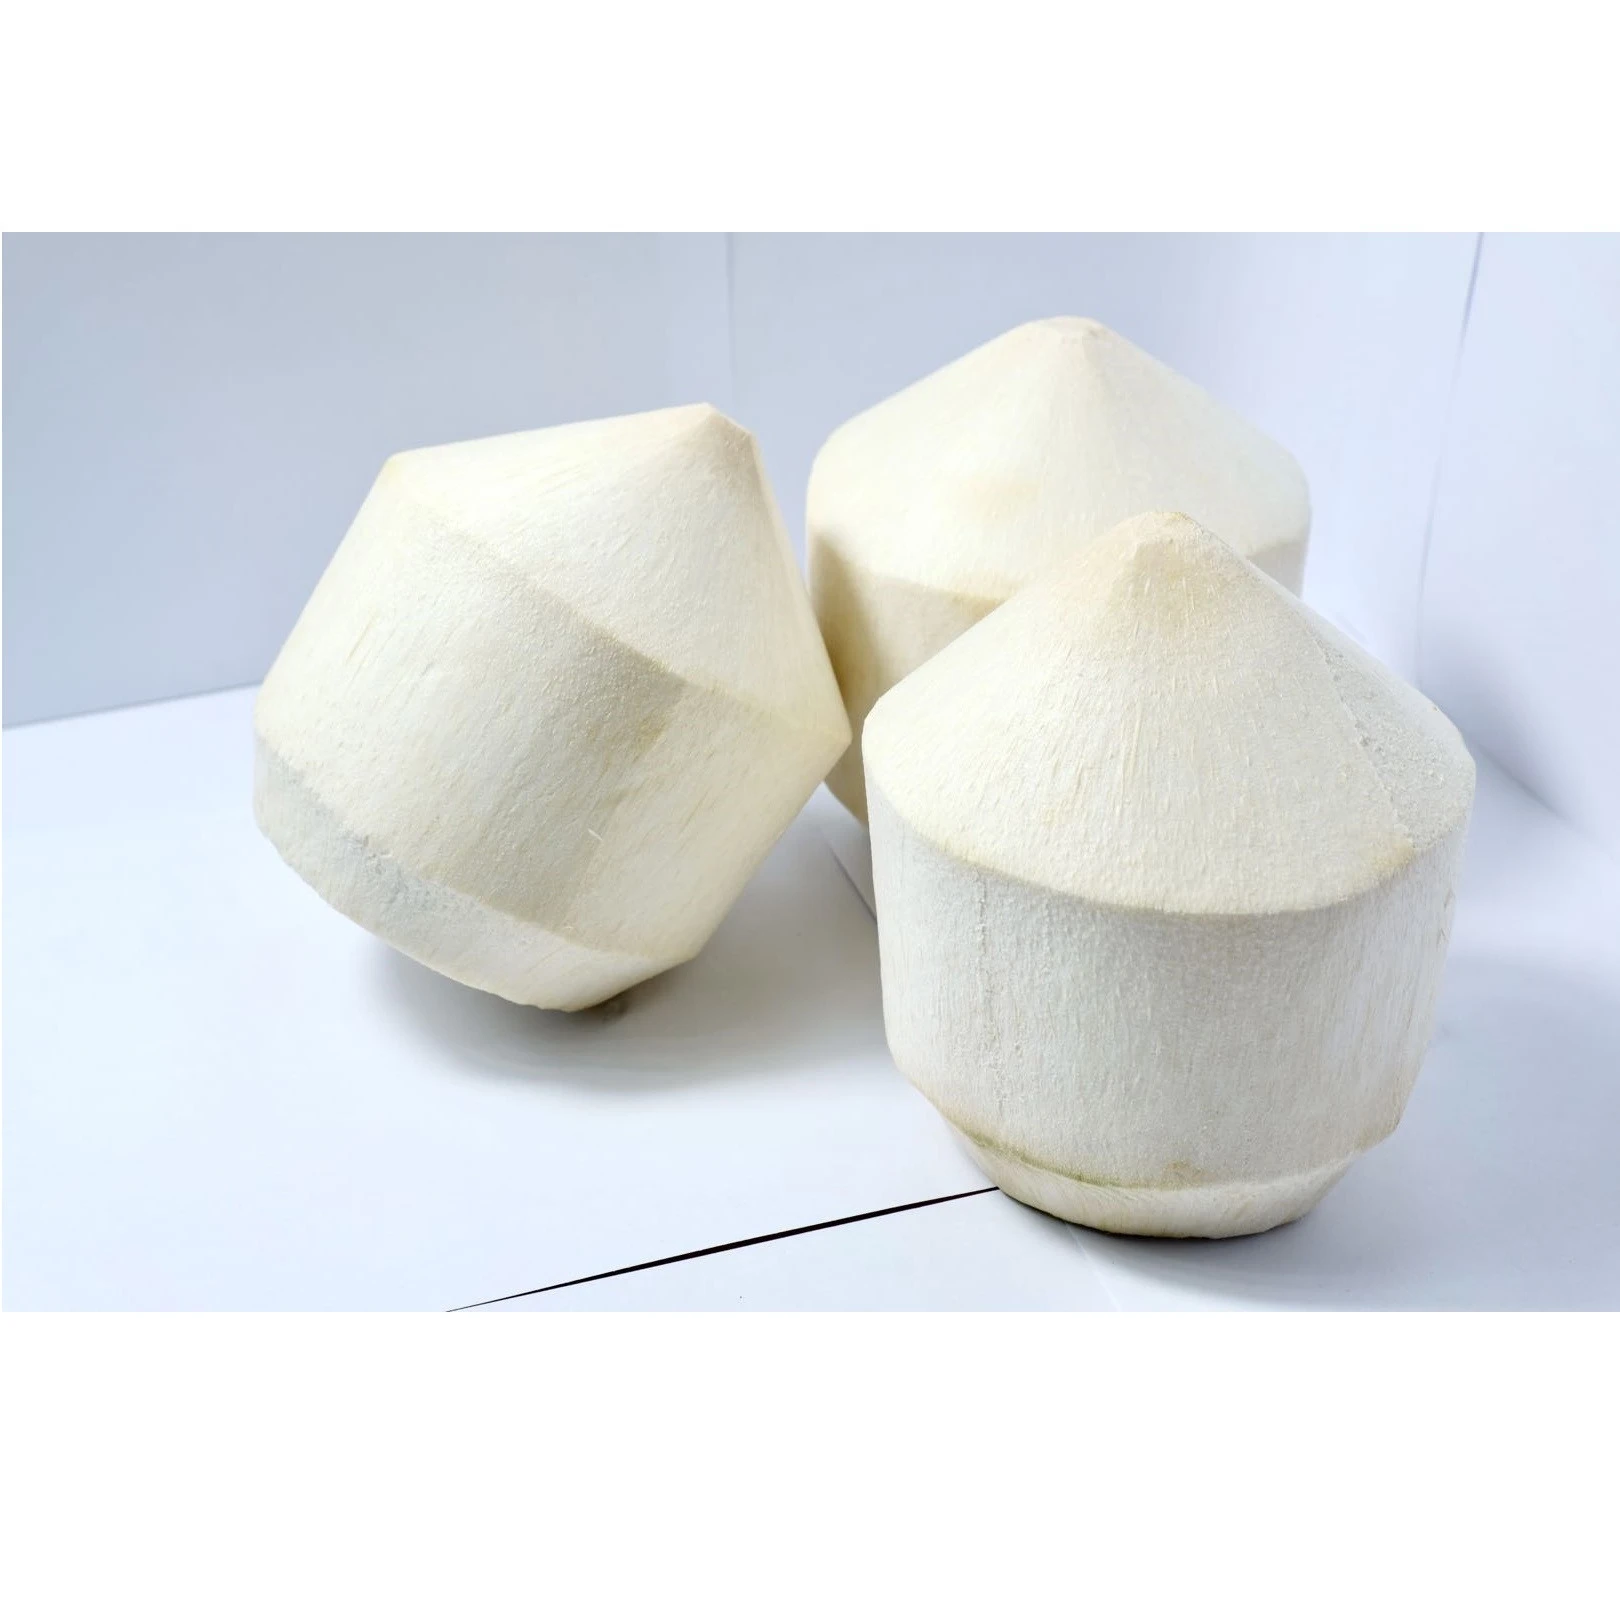 High Quality Thai Natural Fresh Young Coconut For Sale From Thailand With GAP Certification